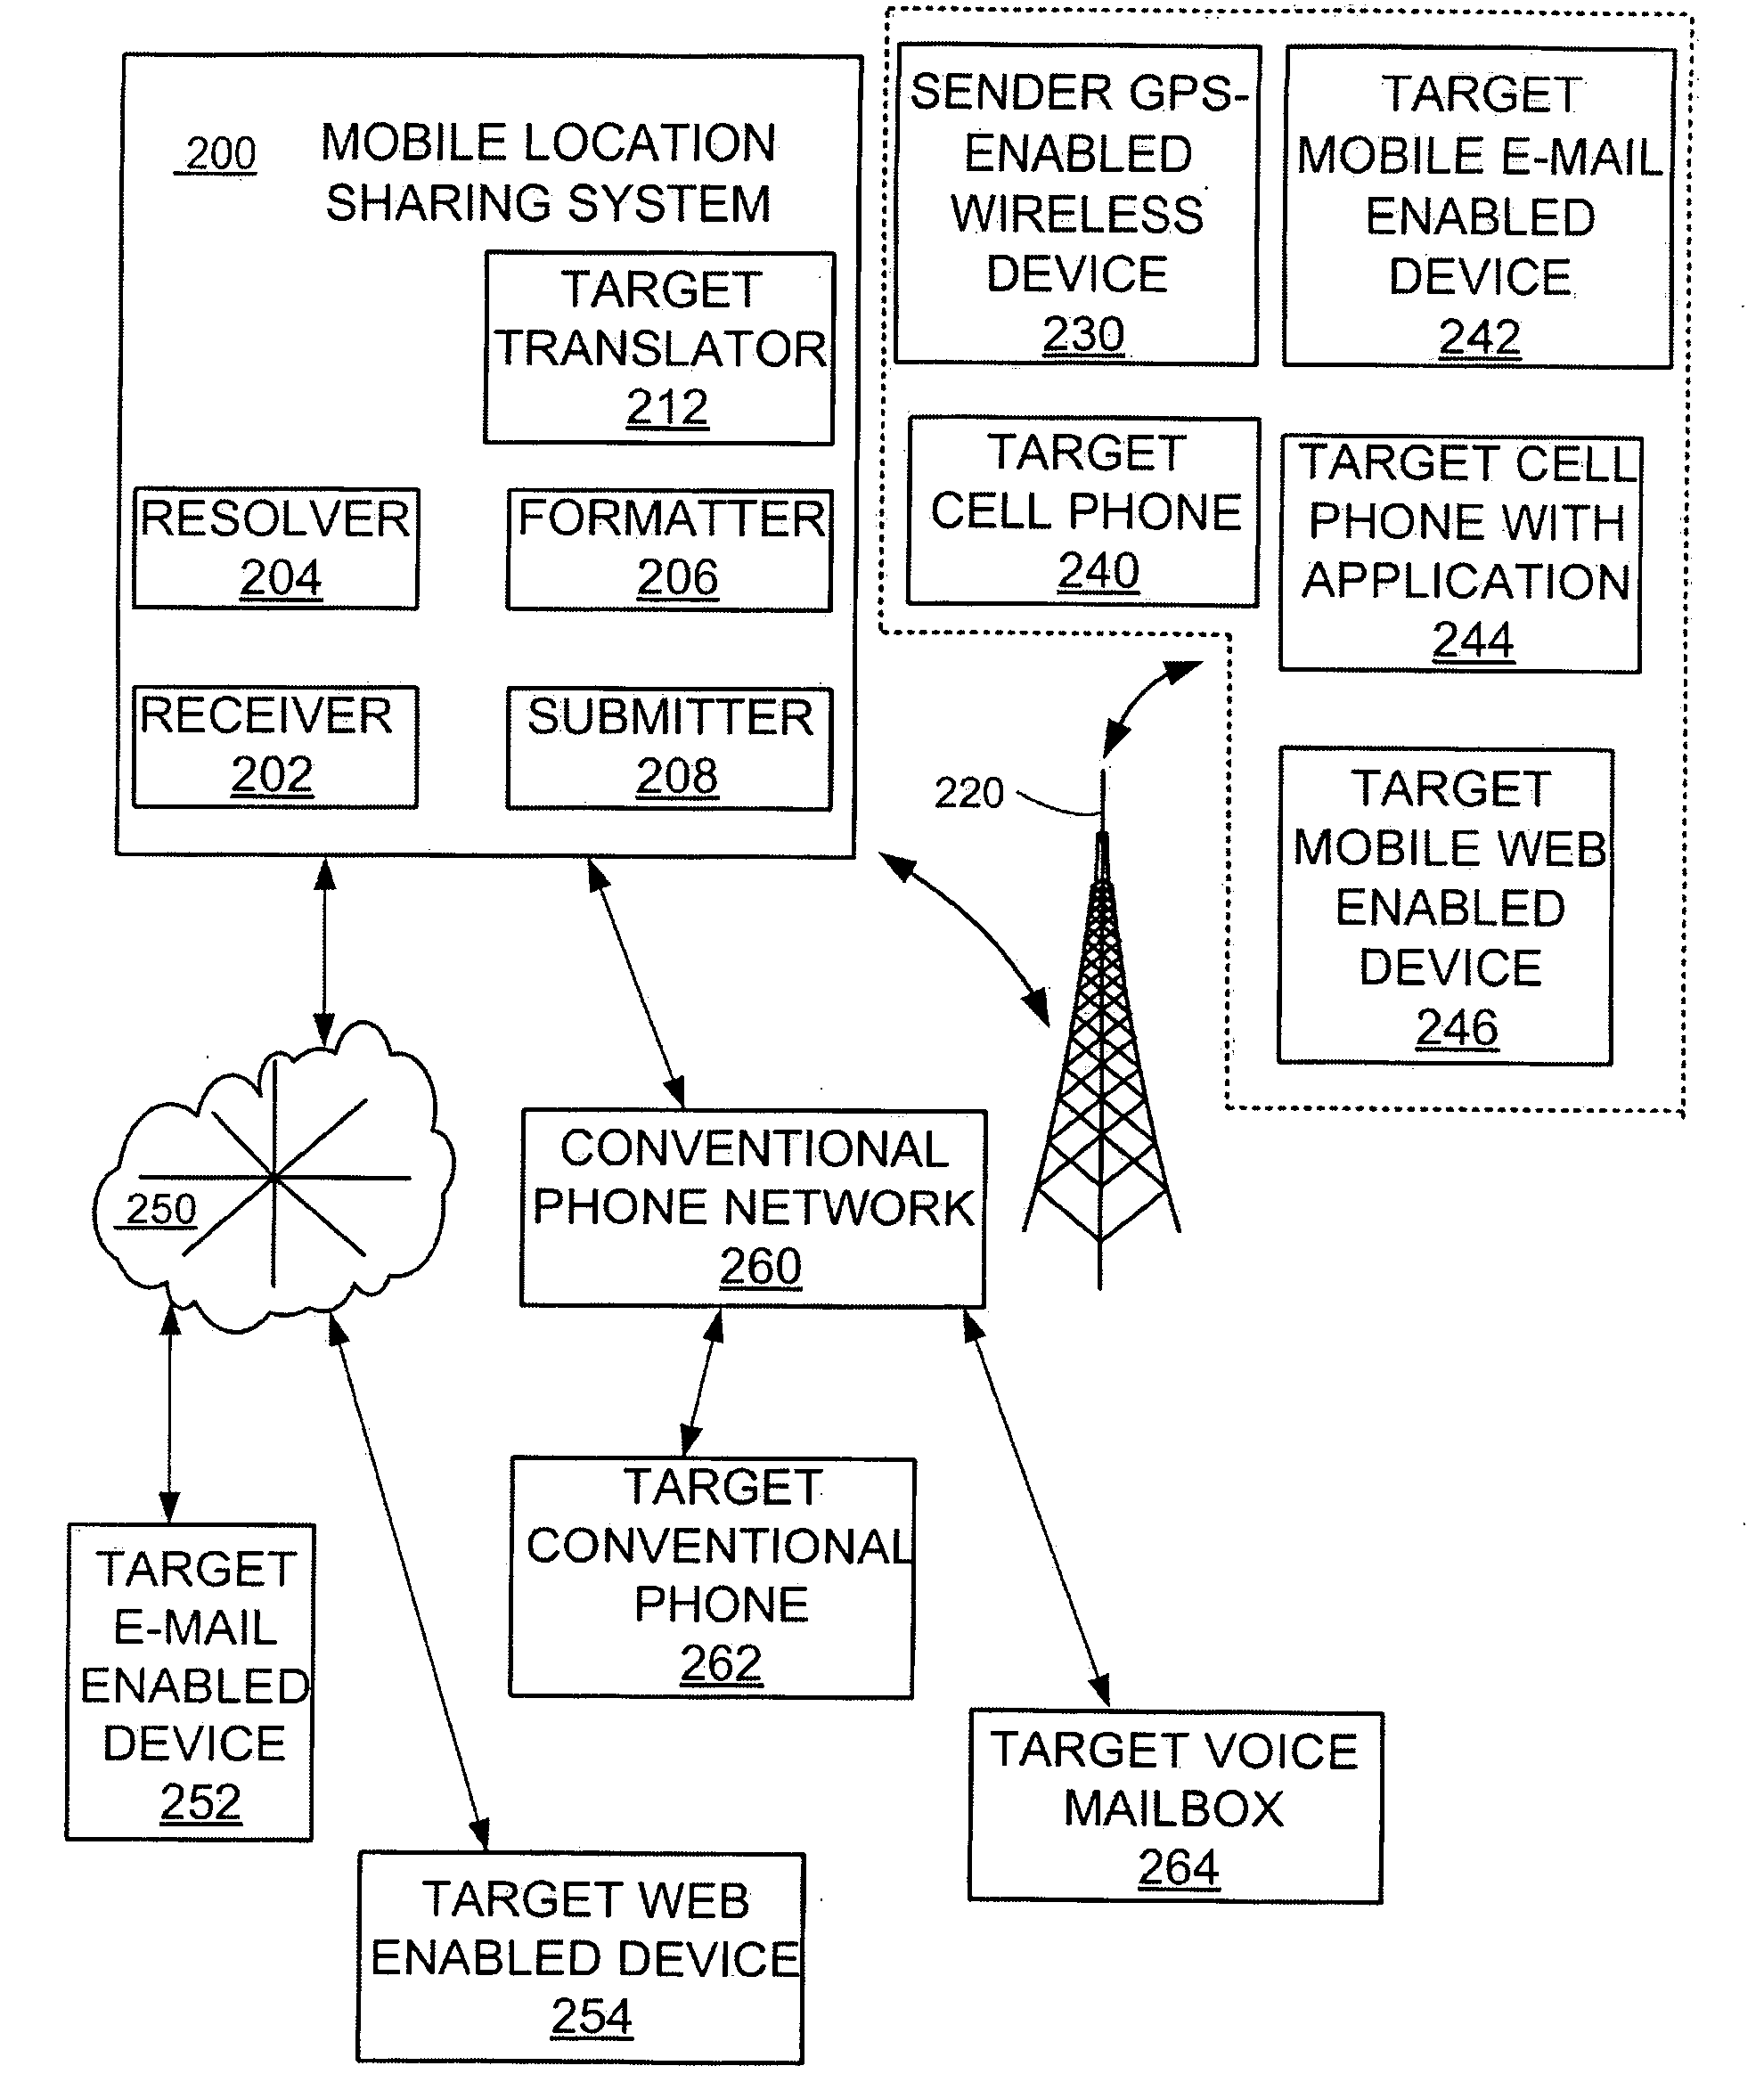 Mobile Location Sharing System